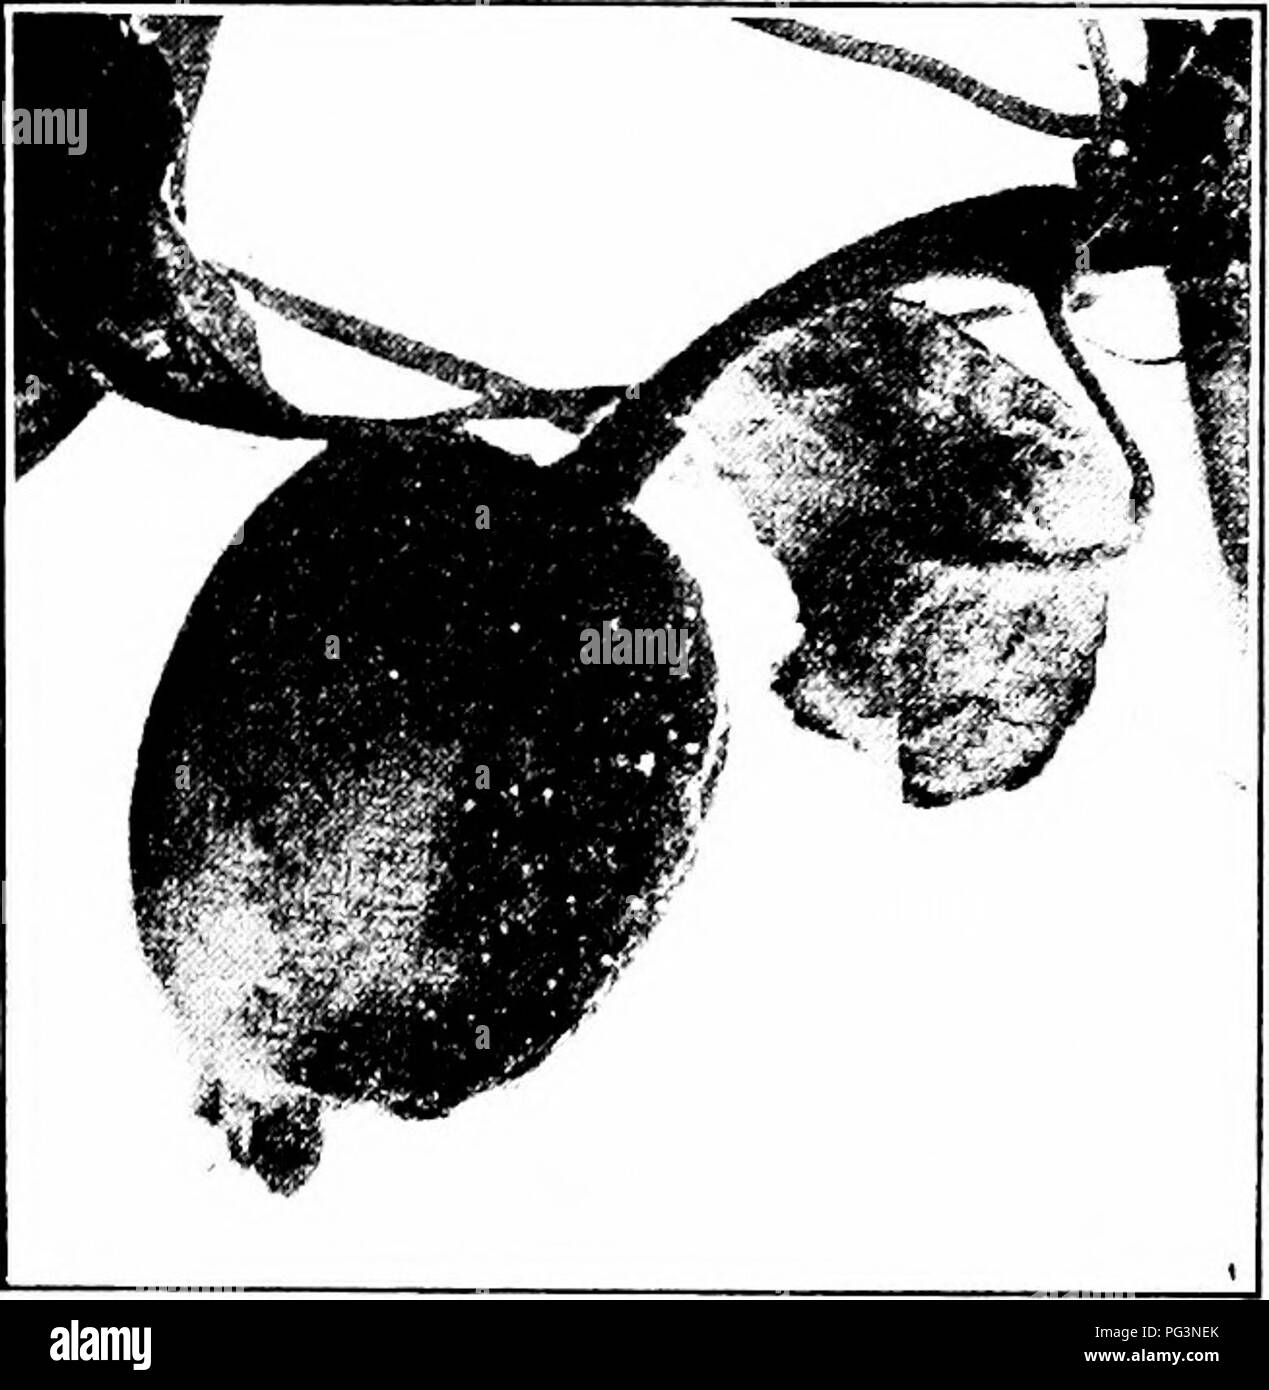 . Manual of fruit diseases . Fruit. PEAR DISEASES 329. Fig. 90. — Fire-blight on apple fruit; drops of bacterial ooze on tlie surface. Suckers which arise from the crown, at or below the surface of the soil, are often bhghted, allow- ing the bacteria entrance into the bark of the roots. Trees may die from such a form of attack. Grafts are especially disposed to blight during the first year or so on account of their rapid and succu- lent growth. Wounds in the larger limbs or the body of the tree may serve as centers of cankers. Here the bacteria are carried by the bark-boring beetle and deposit Stock Photo